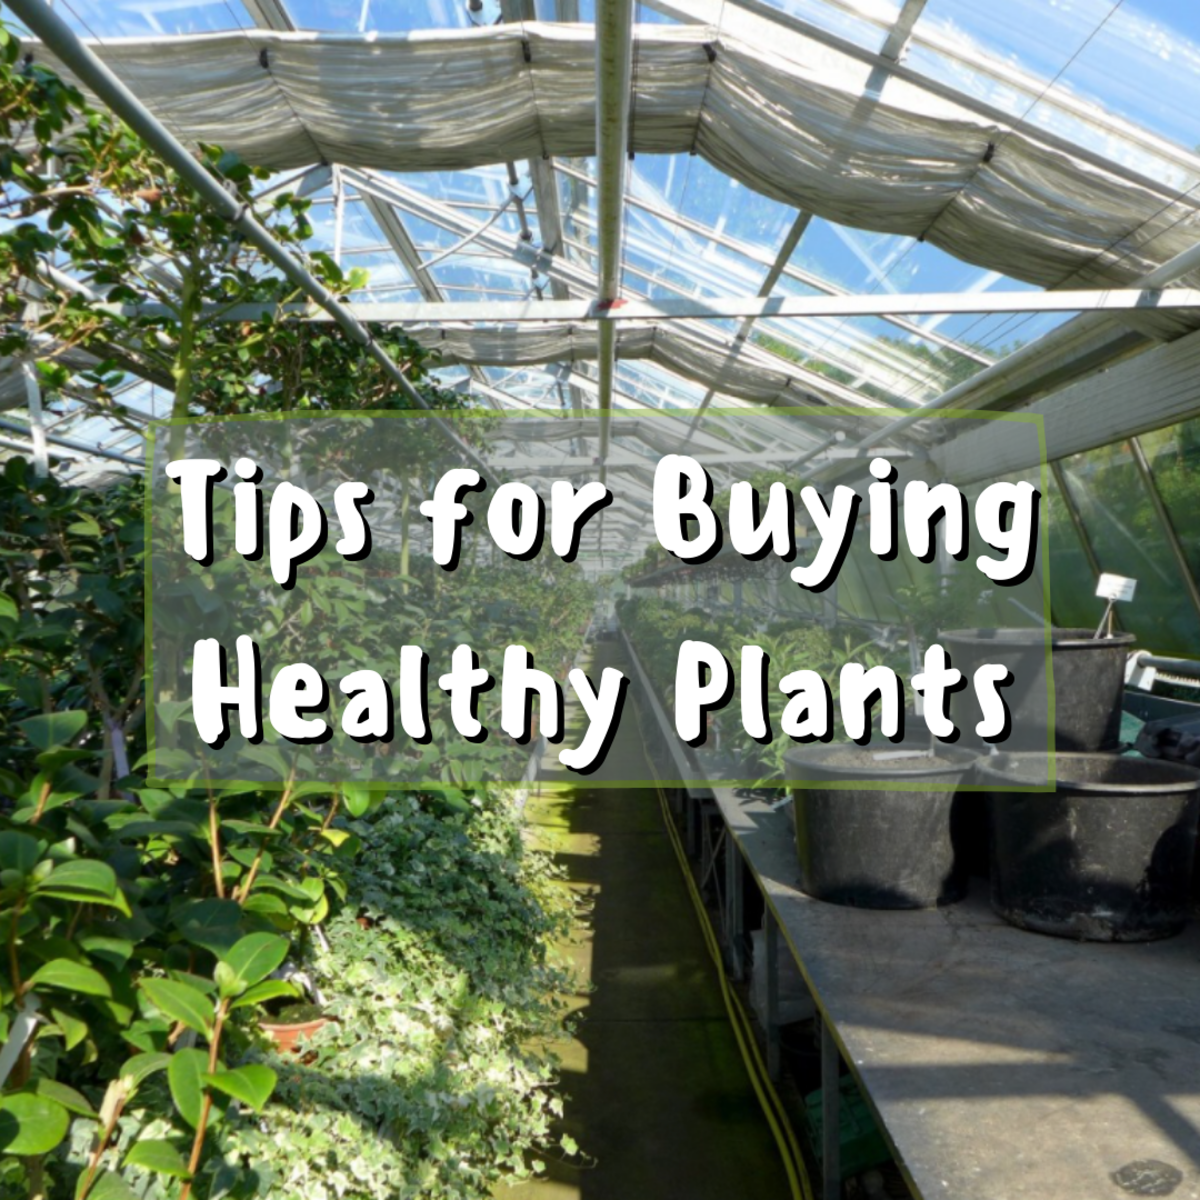 Tips for Buying Healthy Plants